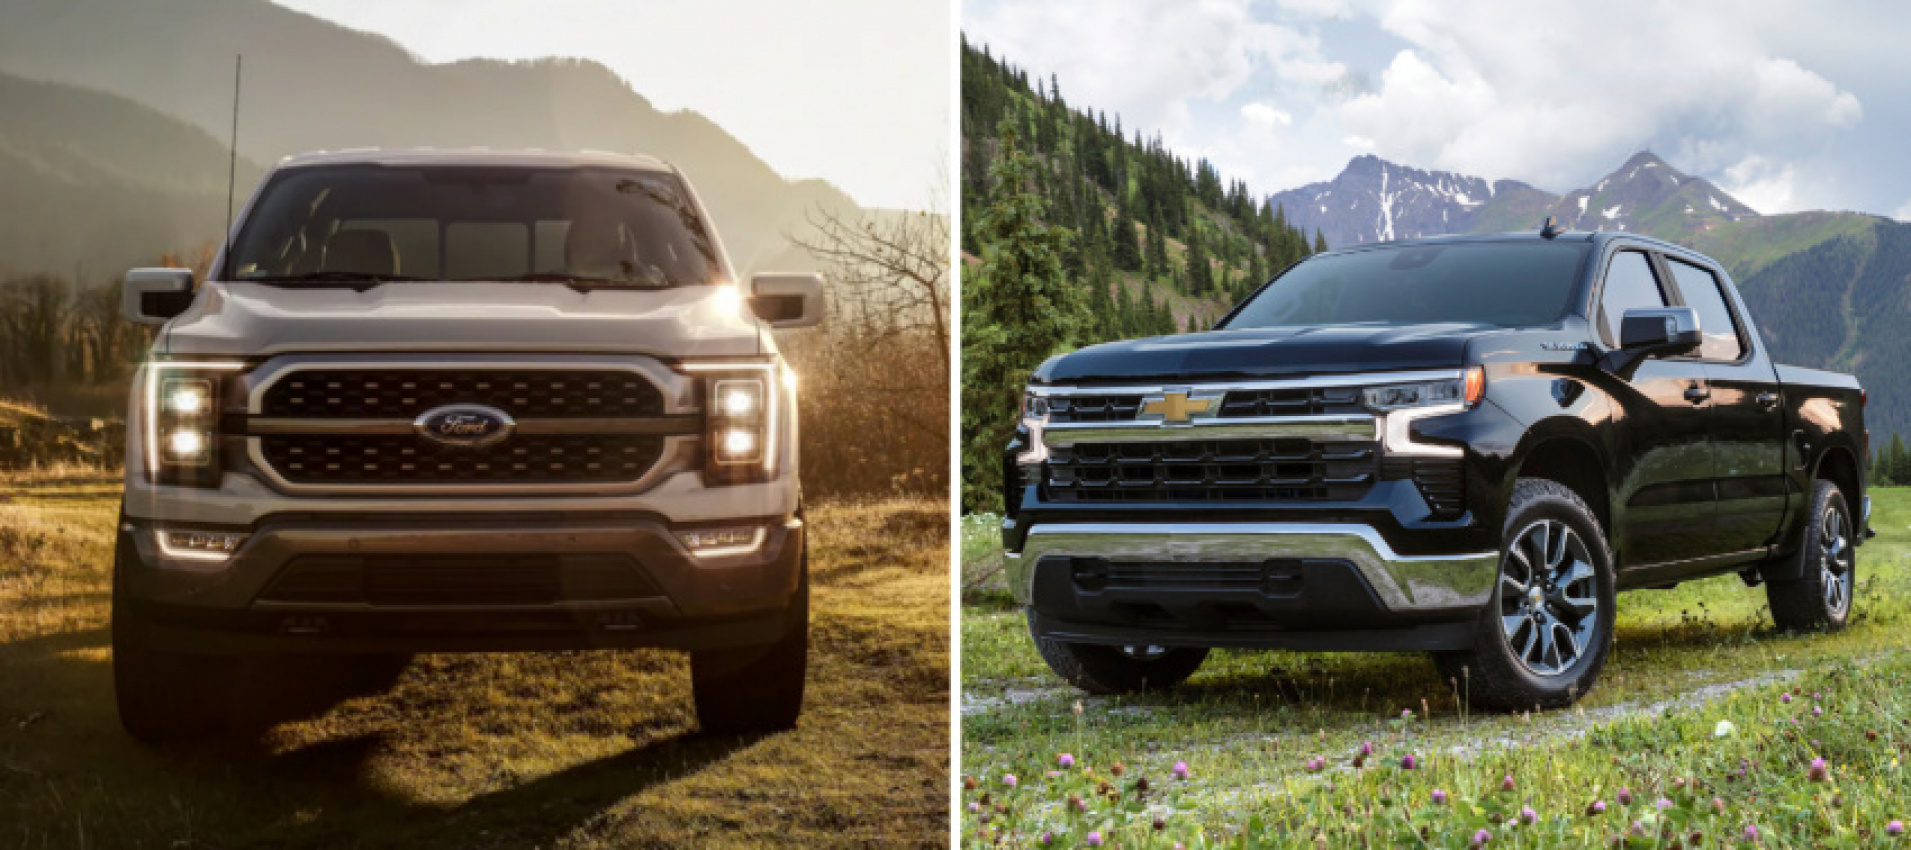 autos, cars, ford, consumer reports, f-150, ford f-150, silverado, consumer reports settles the debate between the ford f-150 and chevy silverado rivalry